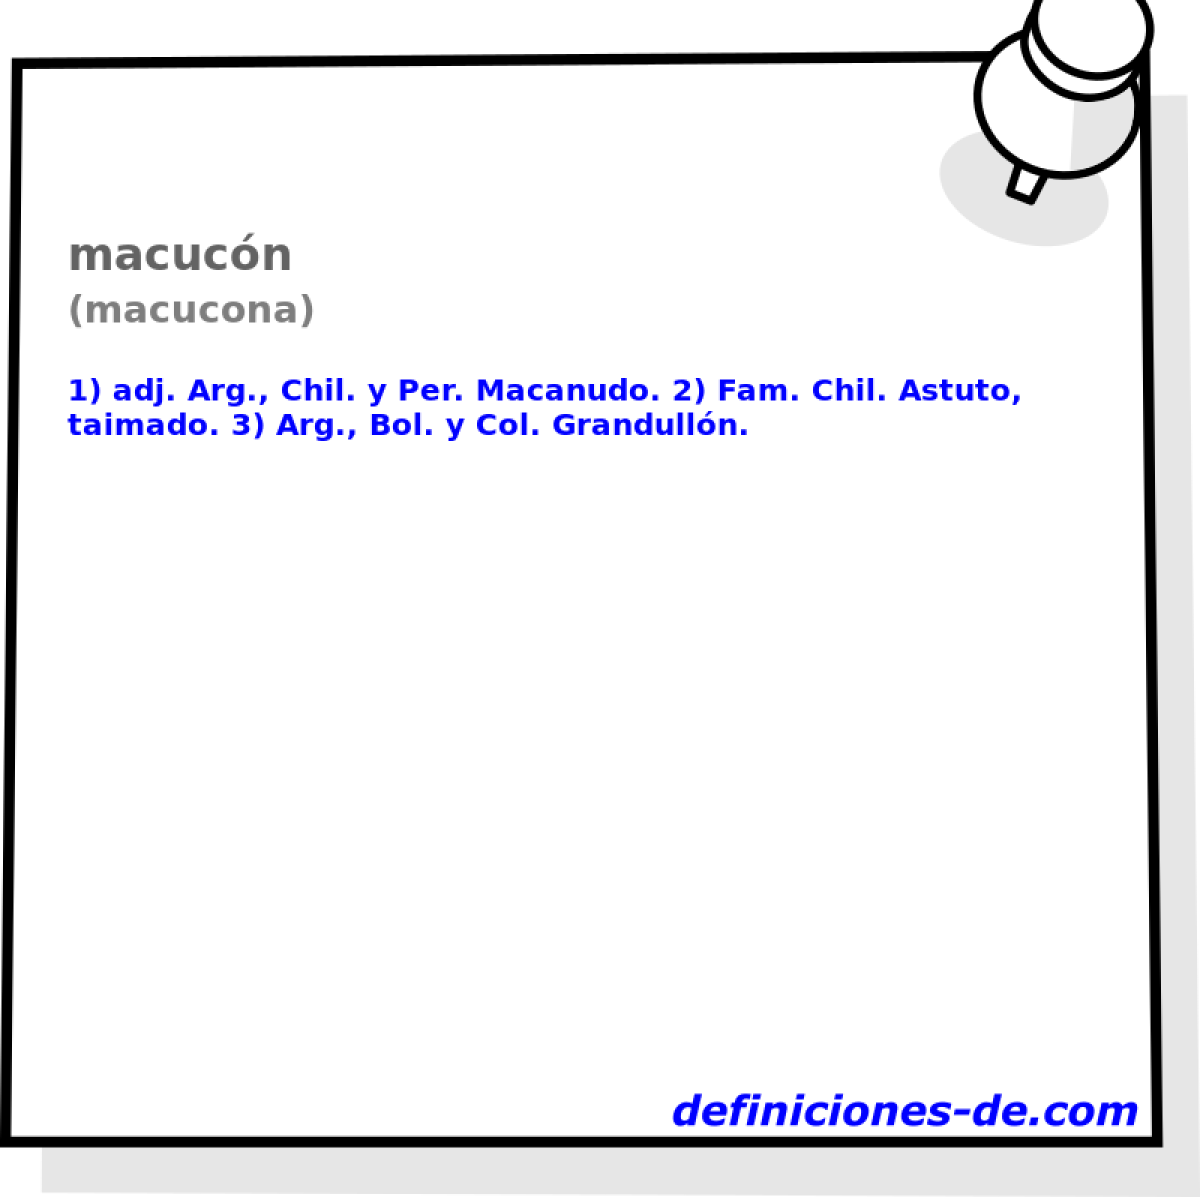 macucn (macucona)